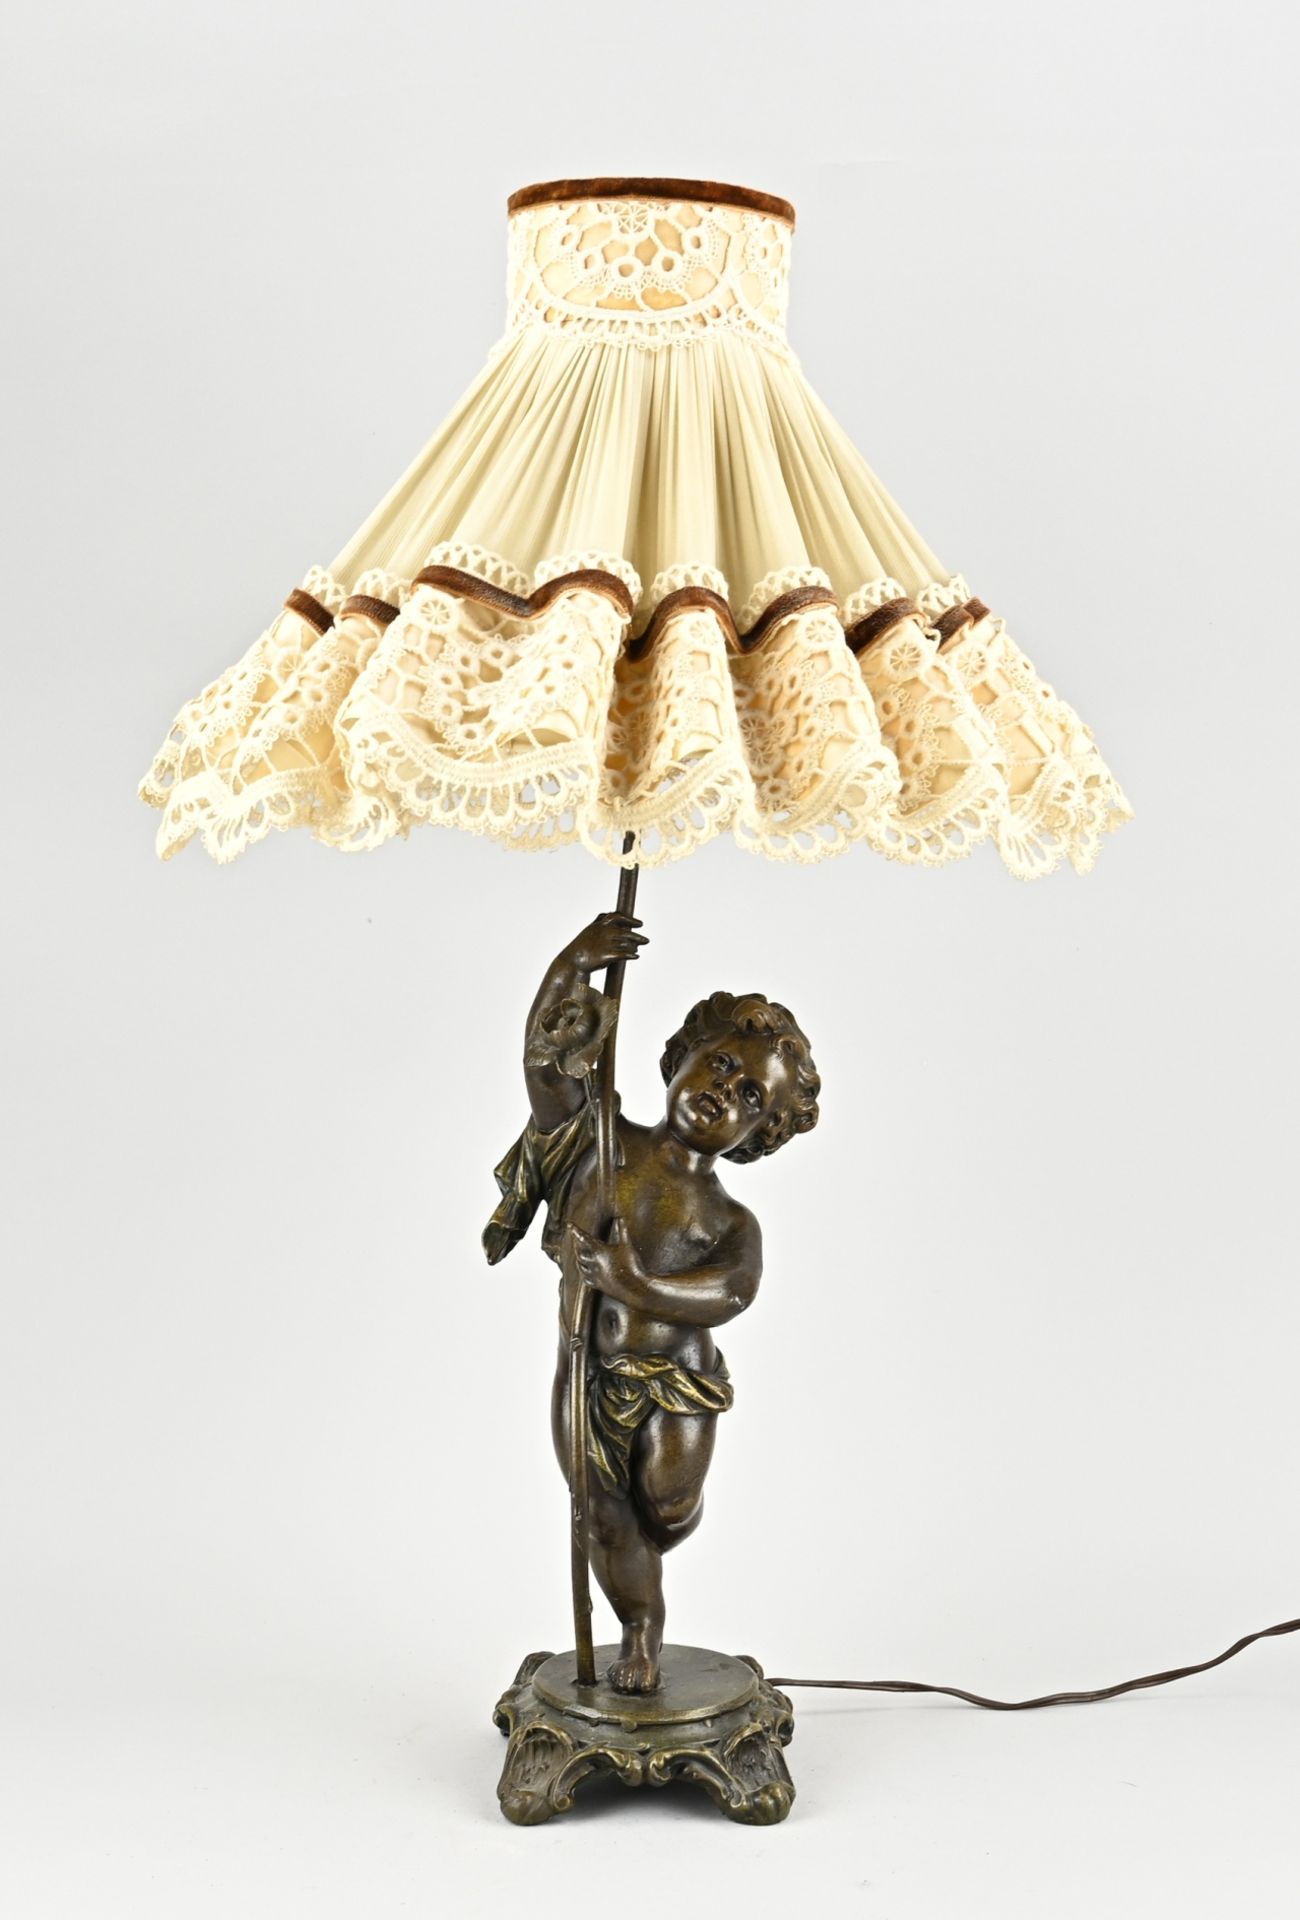 Standing lamp with putti, H 62 cm.